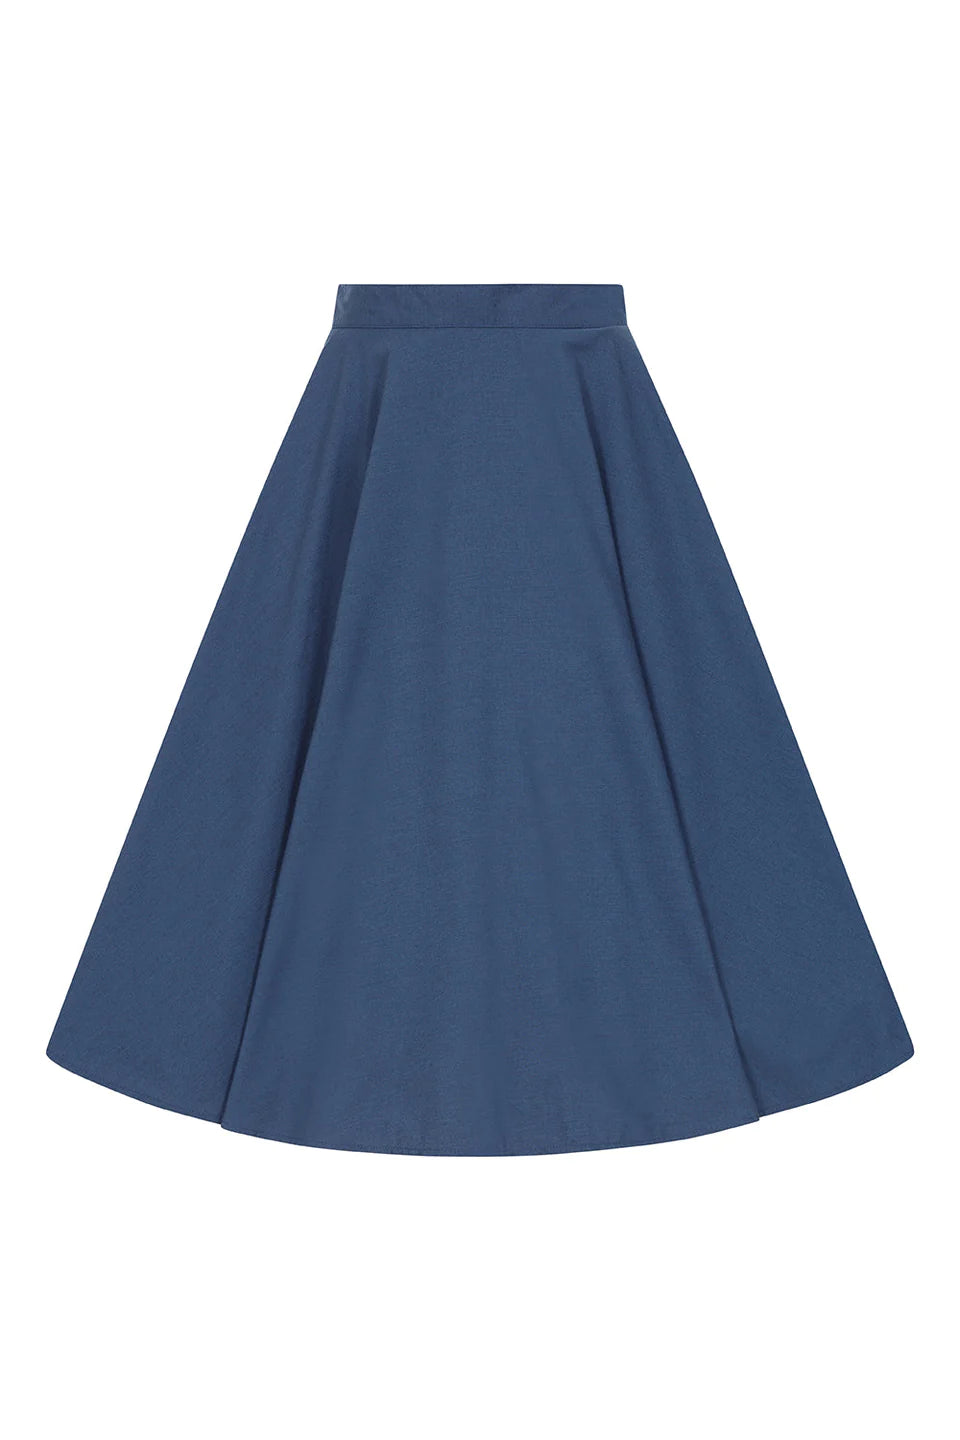 The Abi 50s style swing skirt in navy blue against a white background